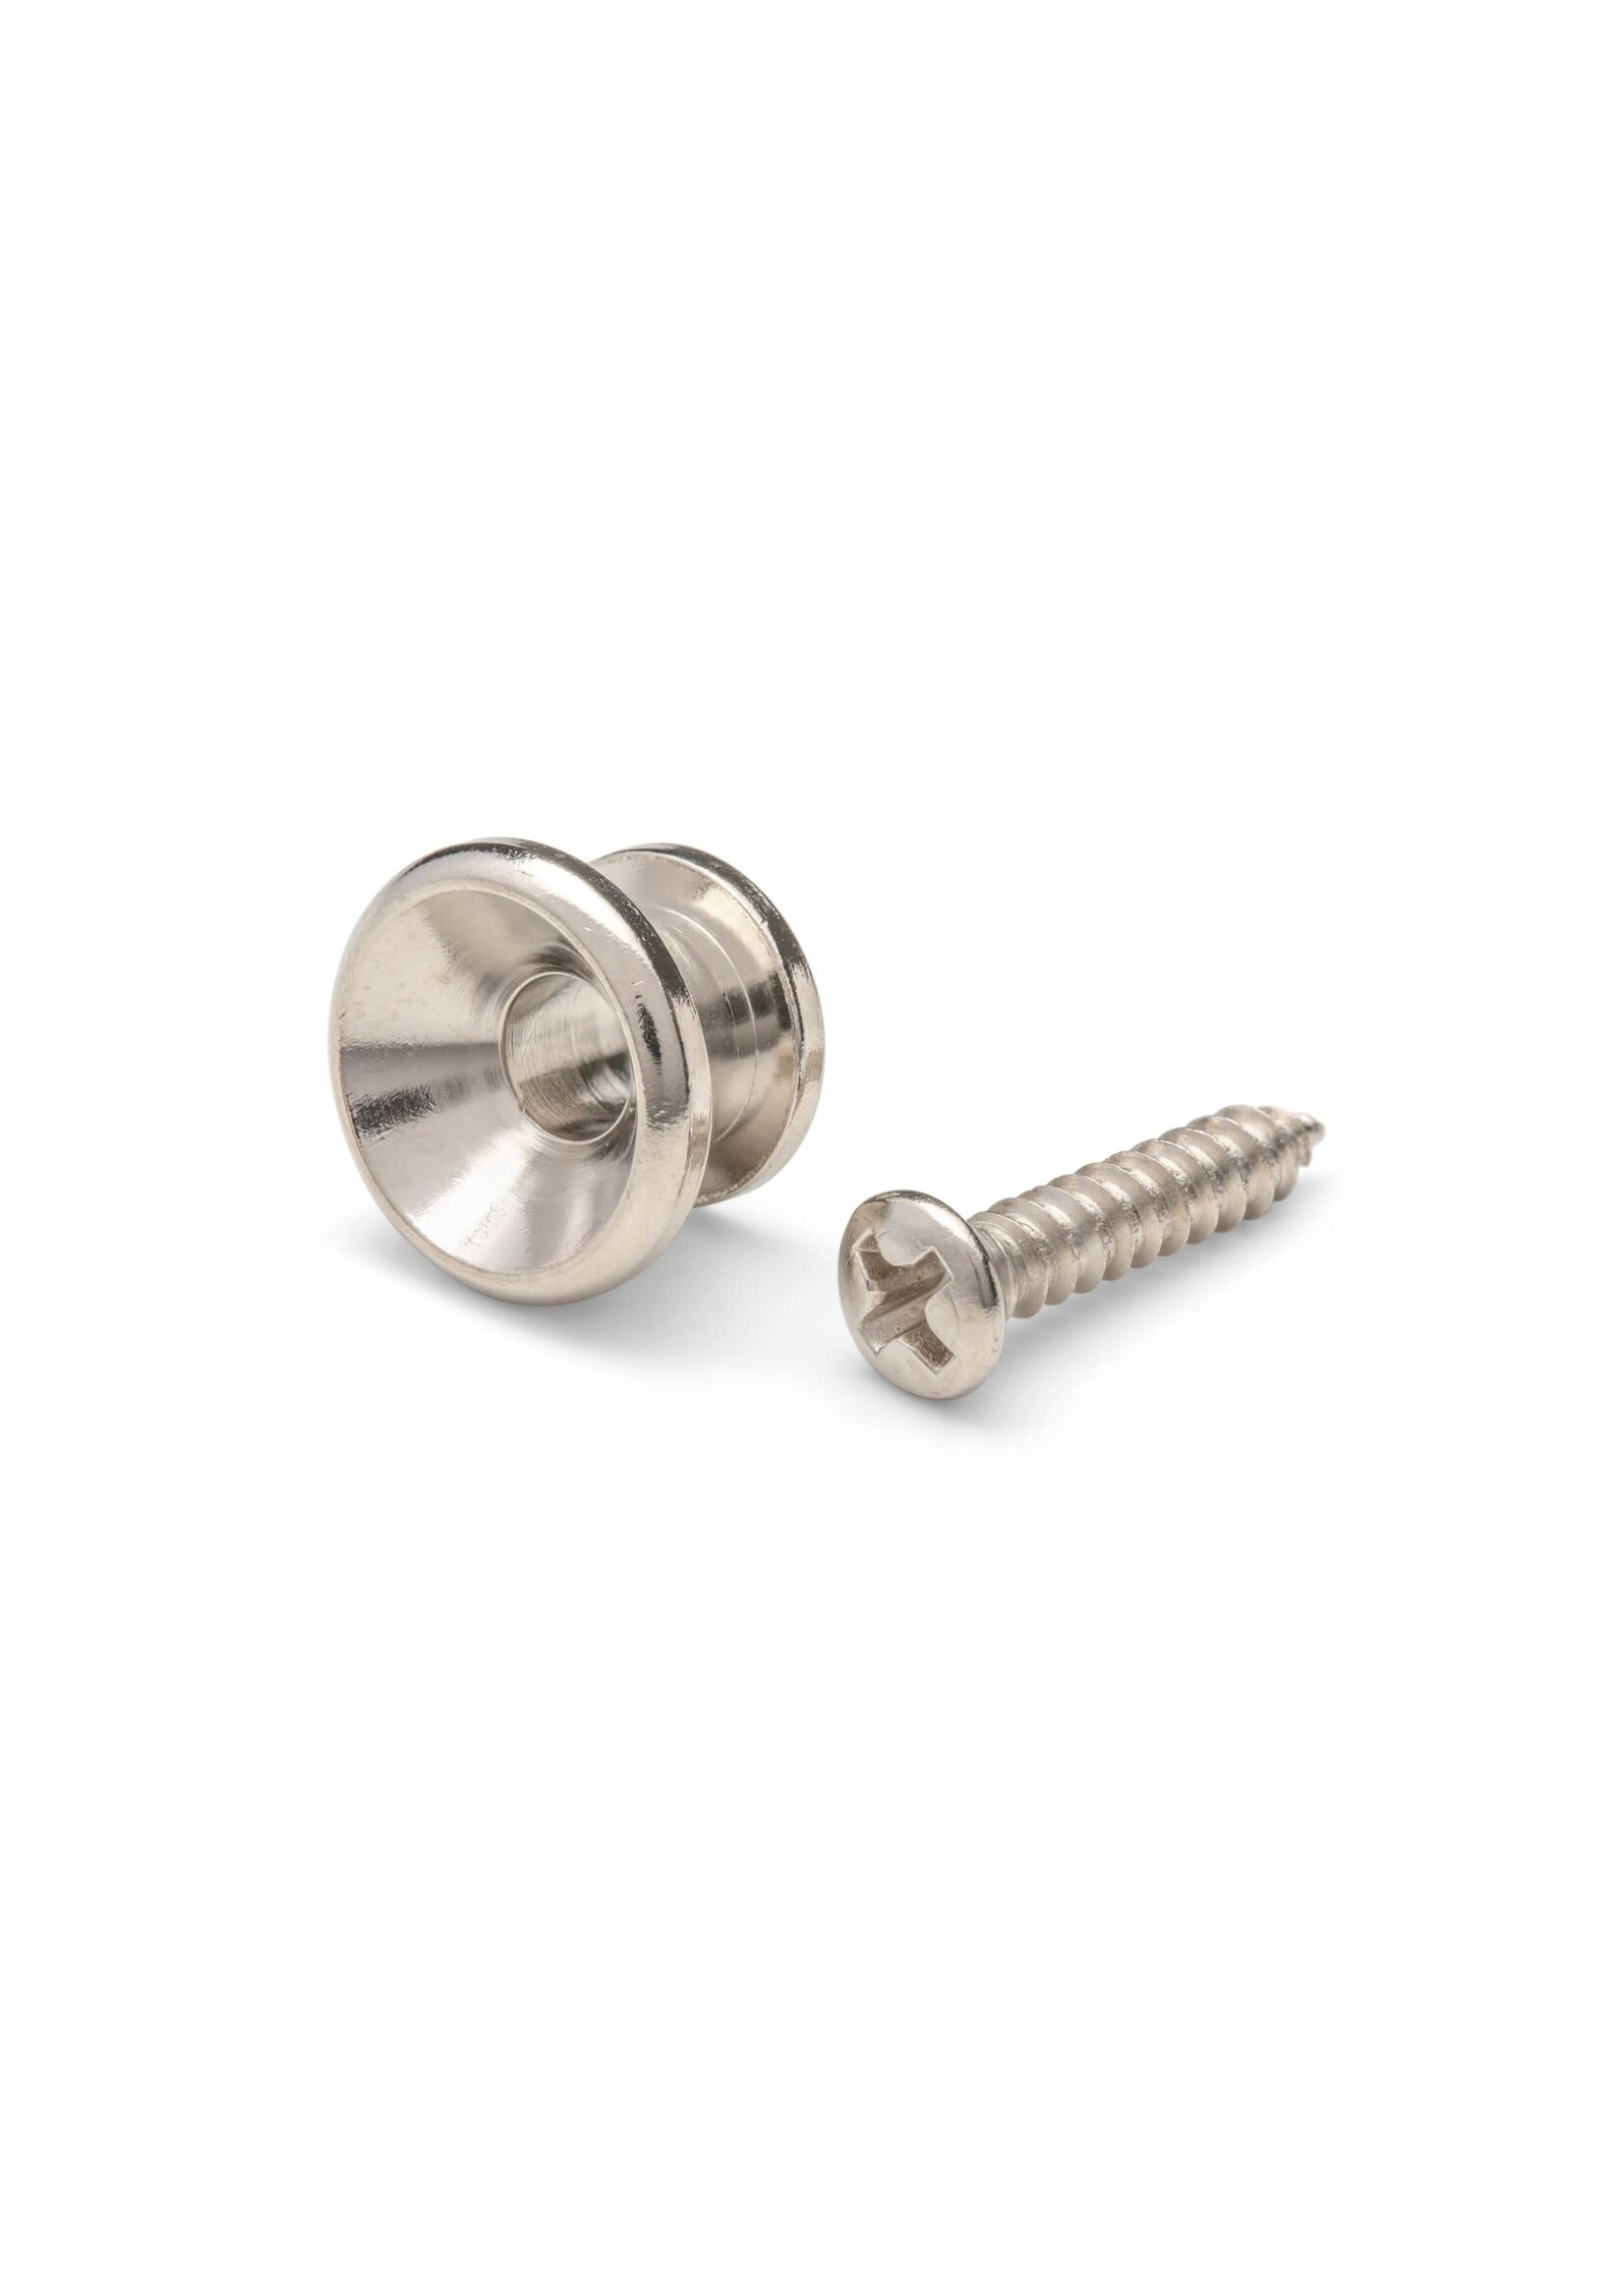 Taylor Guitars TAYLOR STRAP BUTTON & SCREW,NICKEL + $5 Shipping